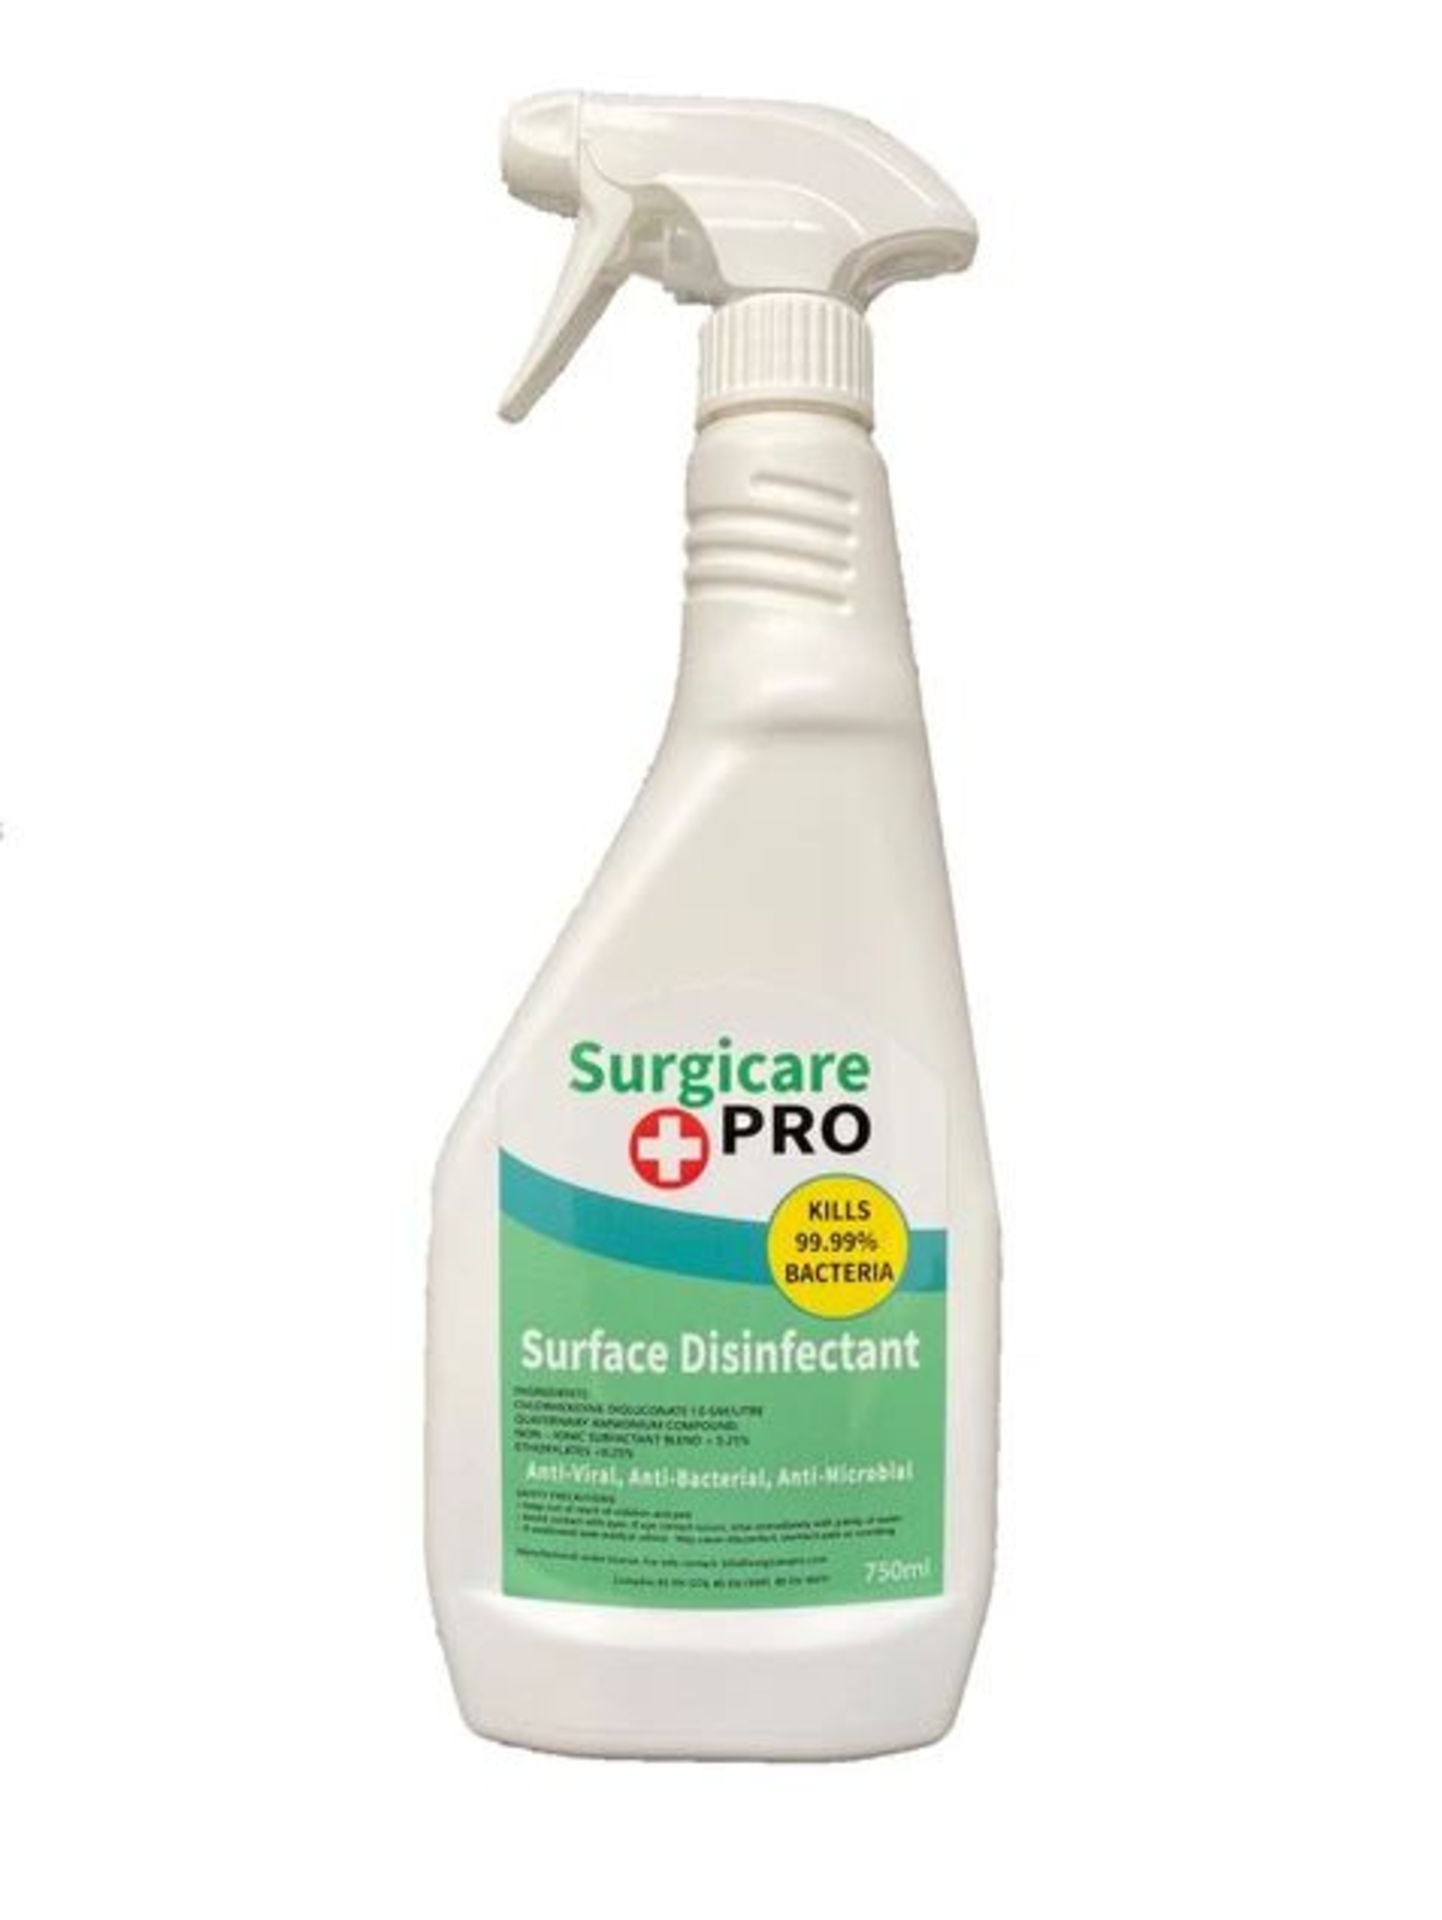 5 Boxes. Each Box Contains 10 Surgicare Pro Surface Disinfectant Spray